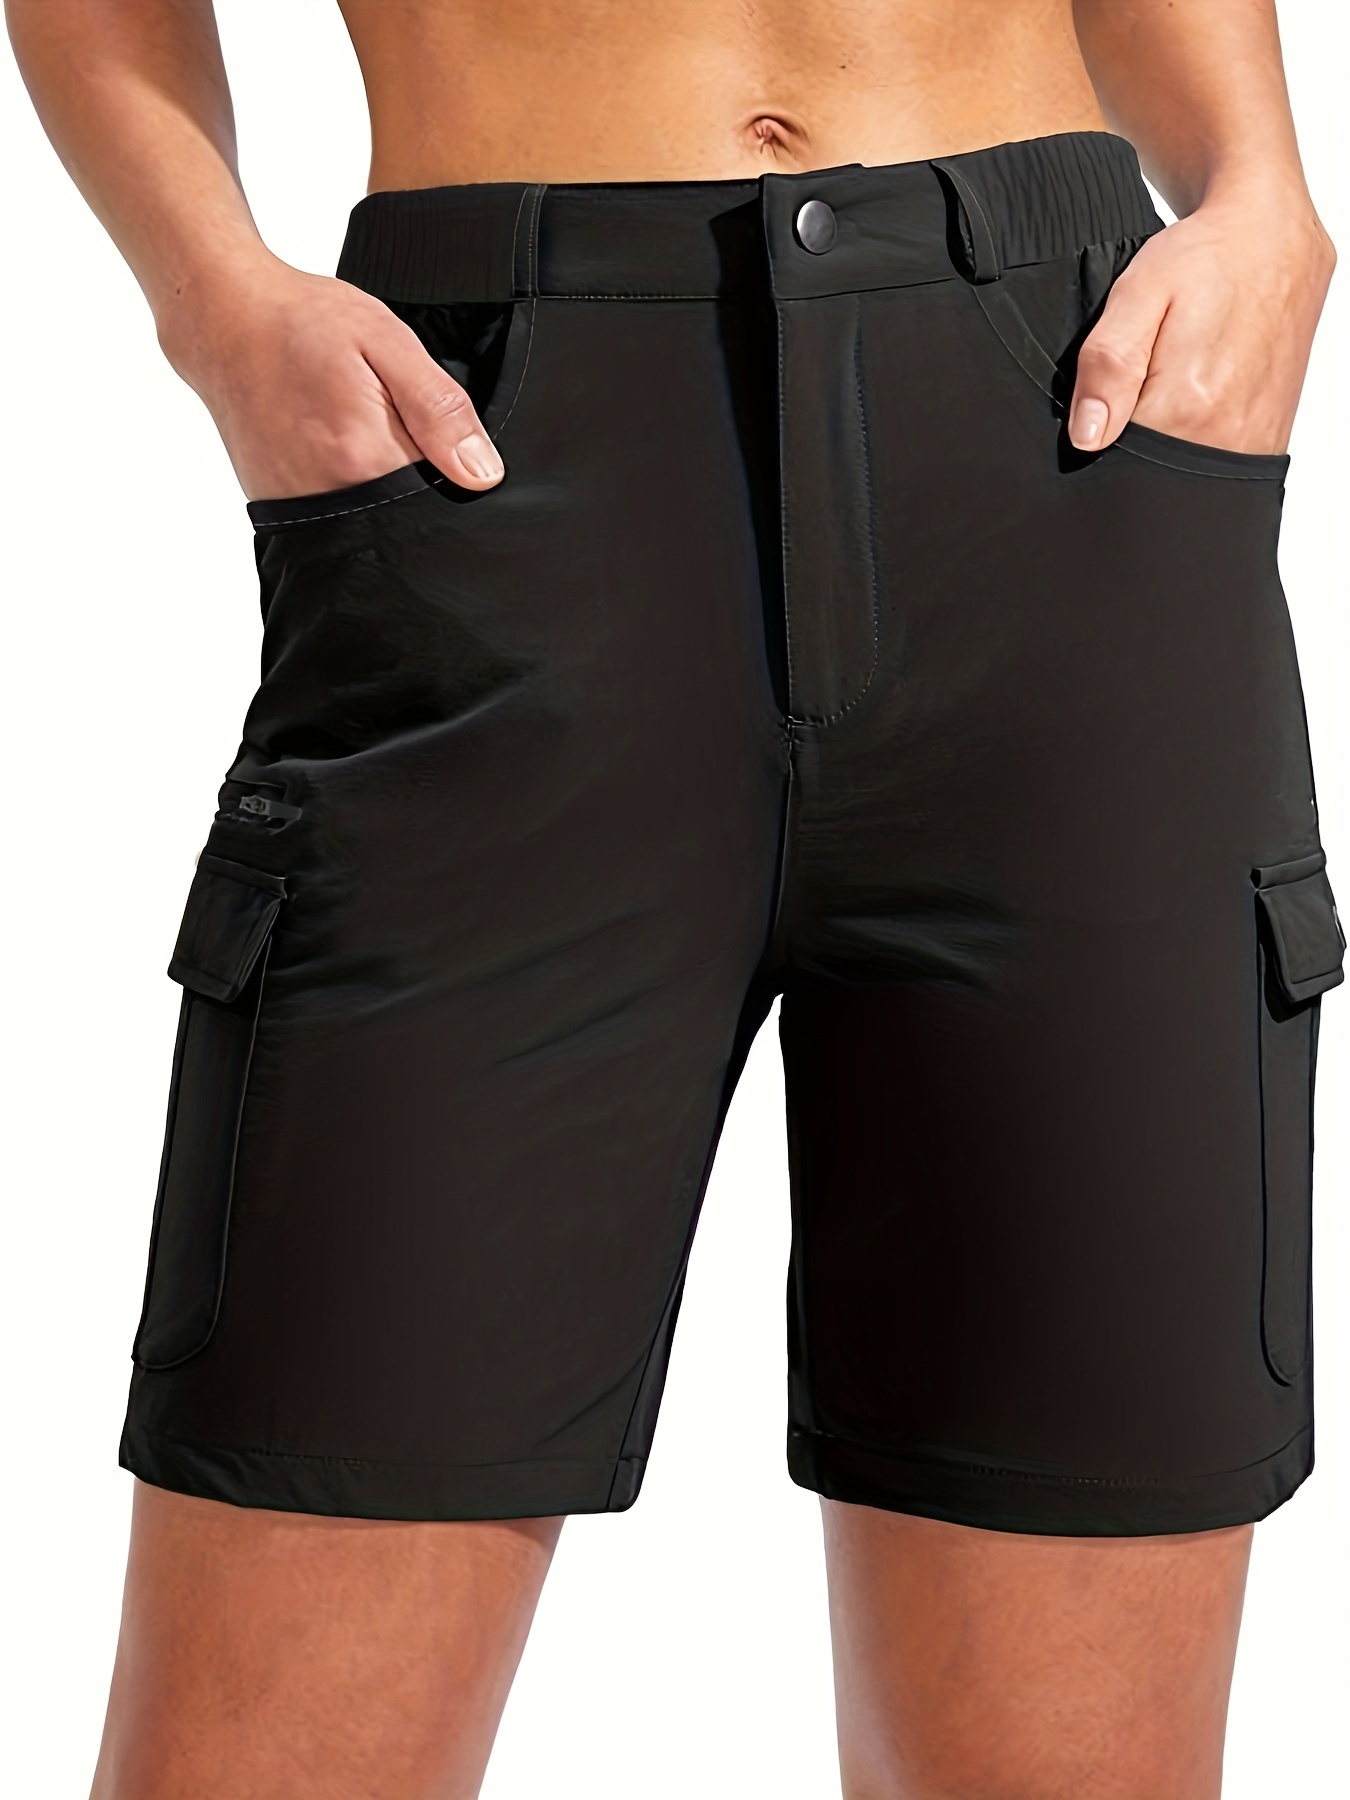 7 Pockets, Lightweight & Quick-Drying: Women's Hiking Cargo Shorts for  Summer Casual Wear